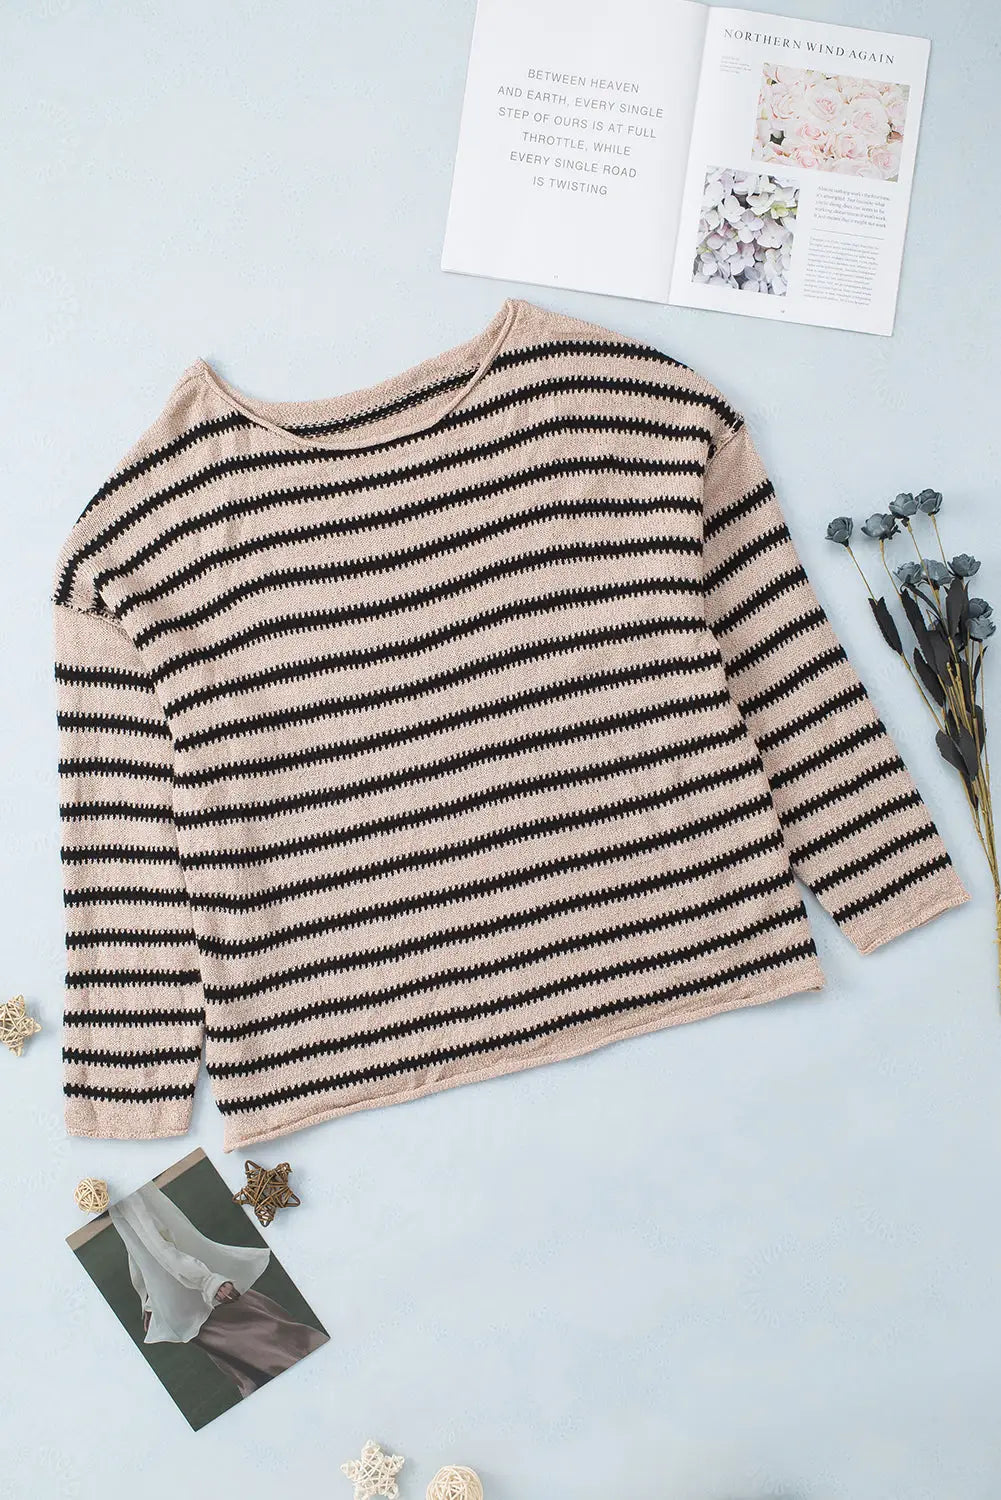 Striped print dropped shoulder loose sleeve sweater - sweaters & cardigans